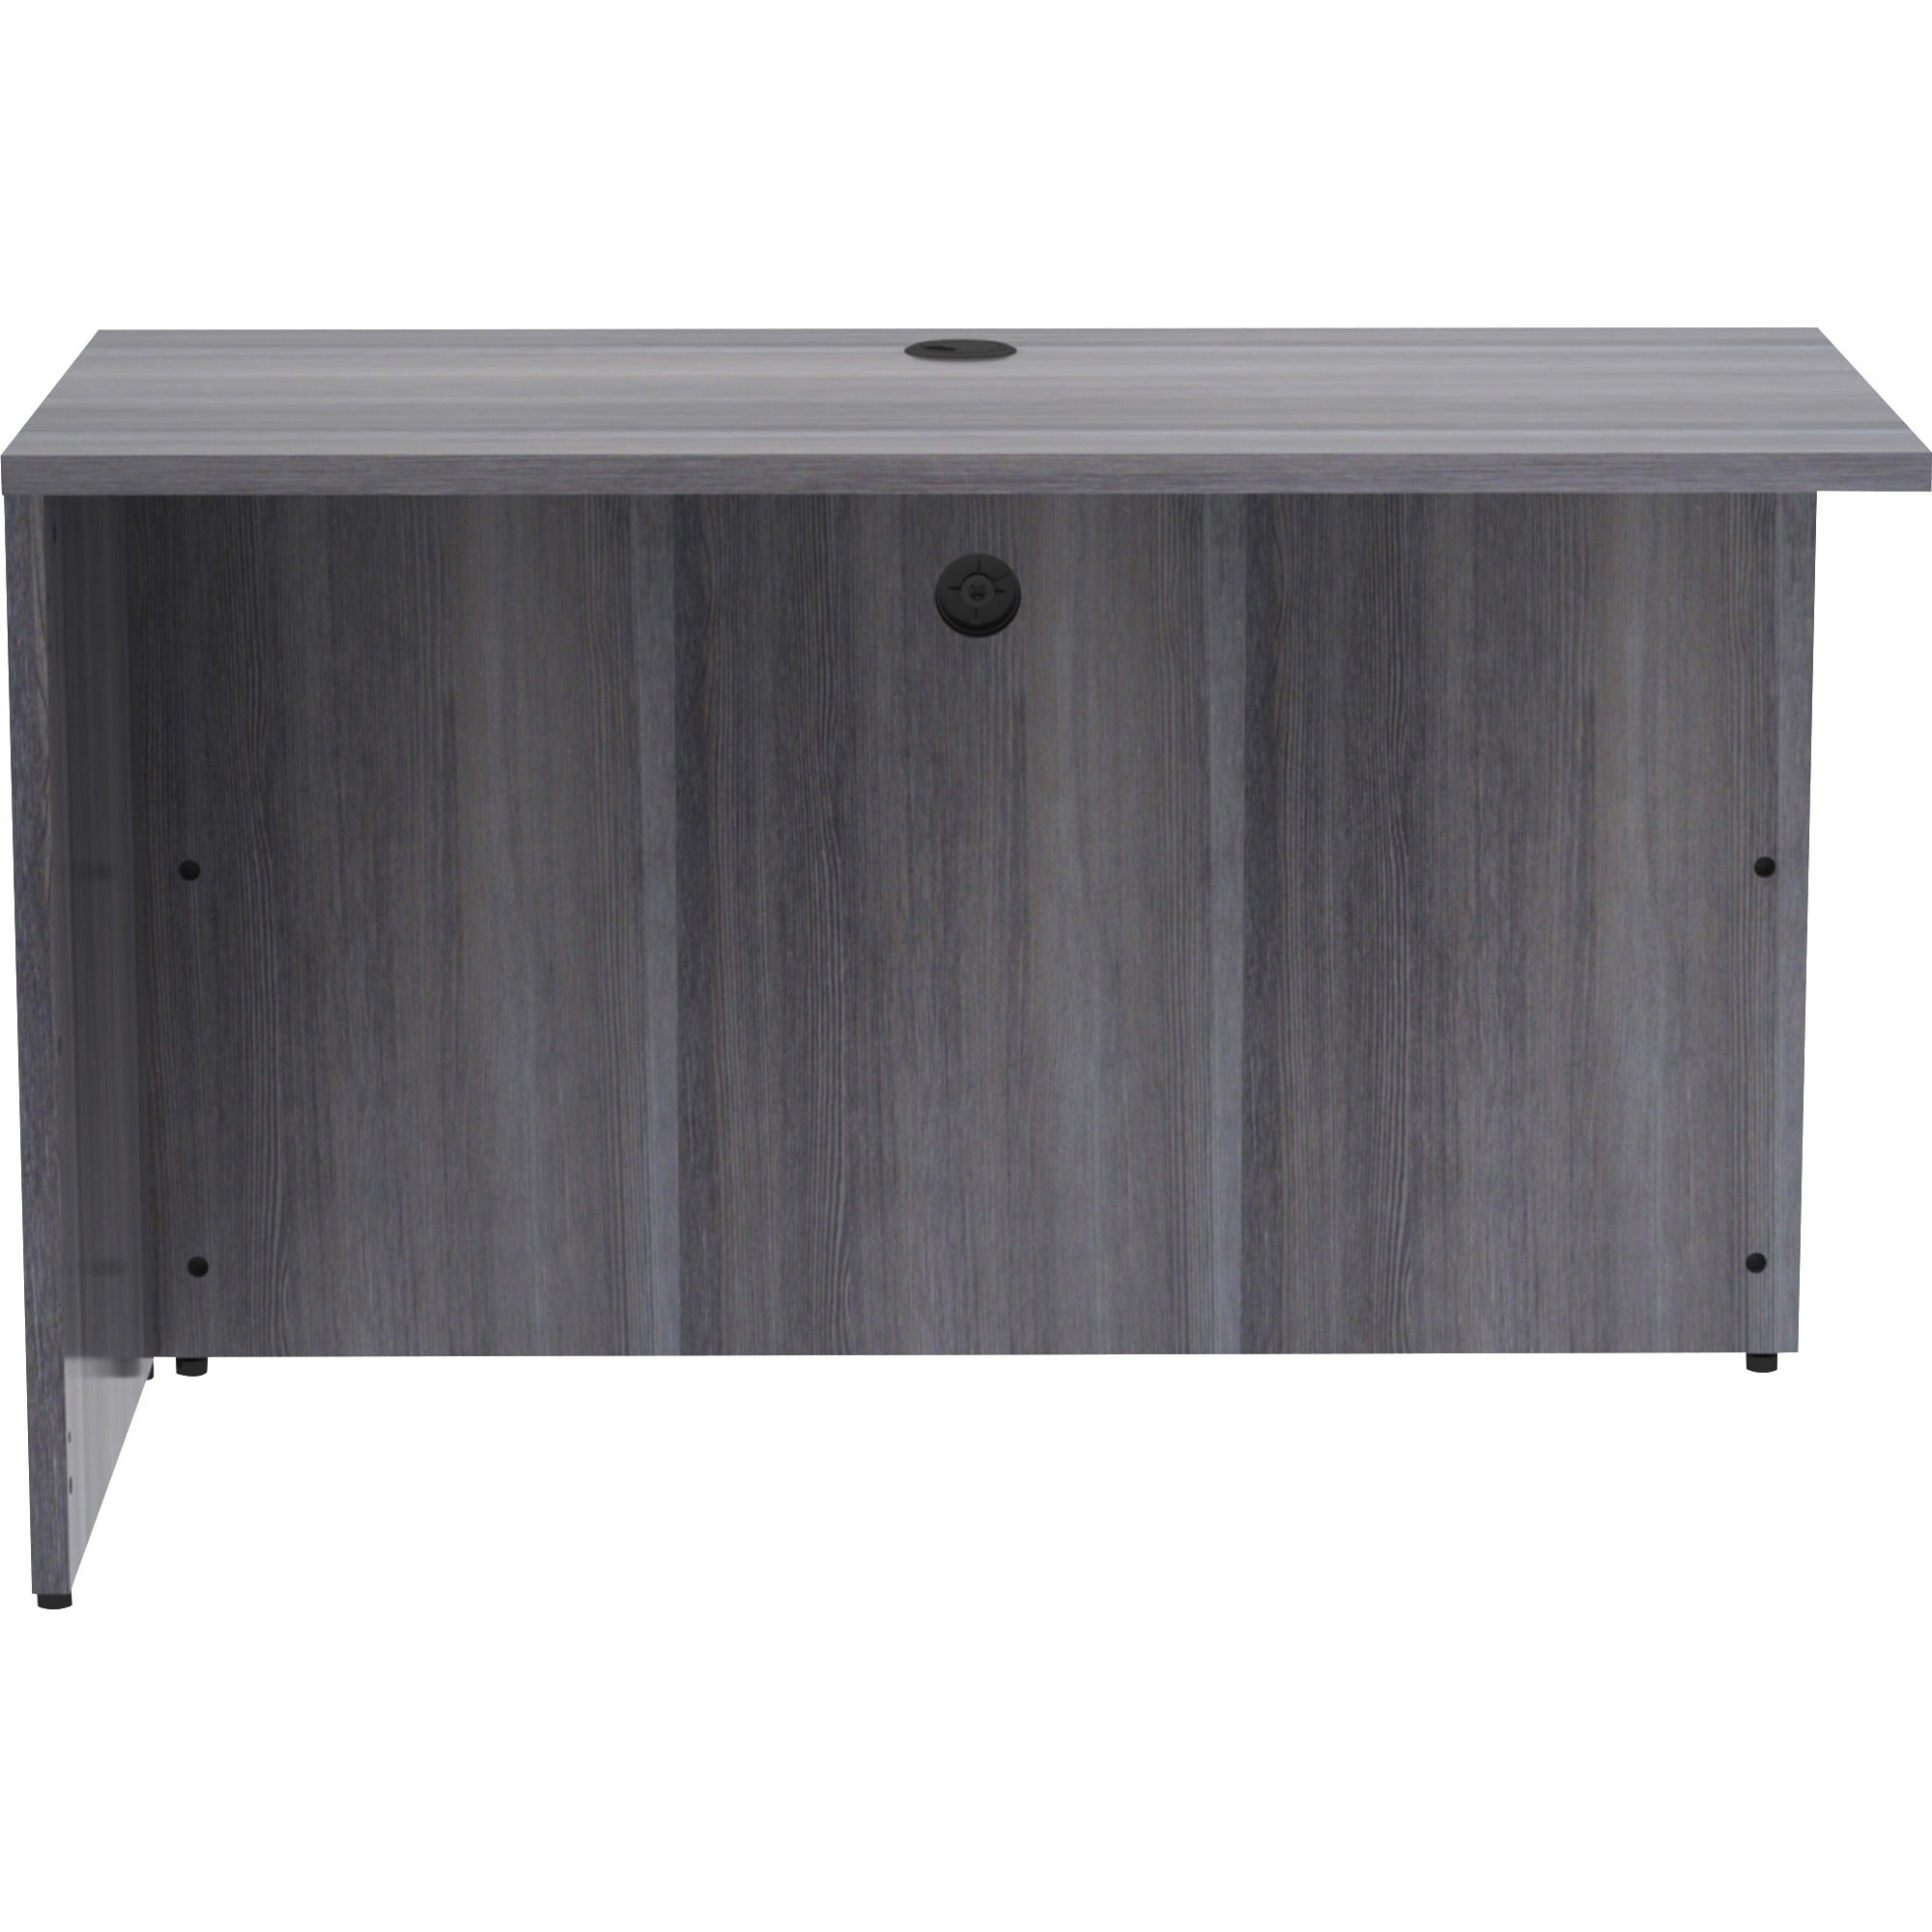 lorell-essentials-series-return-shell-48-x-24295--1-top-laminate-weathered-charcoal-table-top-modesty-panel_llr69554 - 3